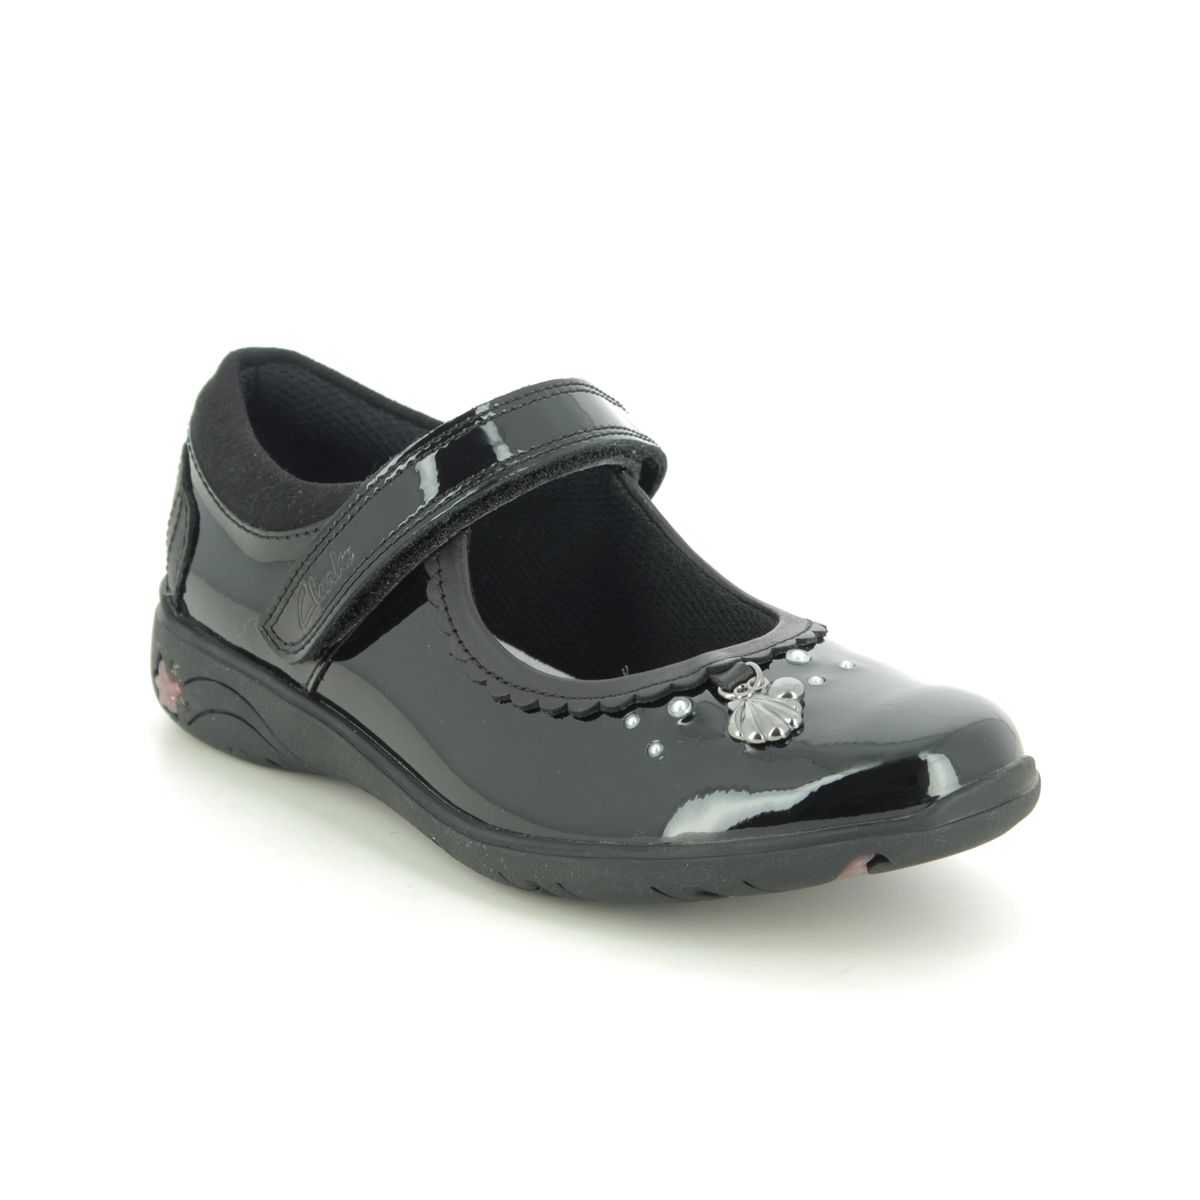 Clarks Sea Shimmer K Black patent Kids girls school shoes 5554-36F in a Plain Leather in Size 1.5